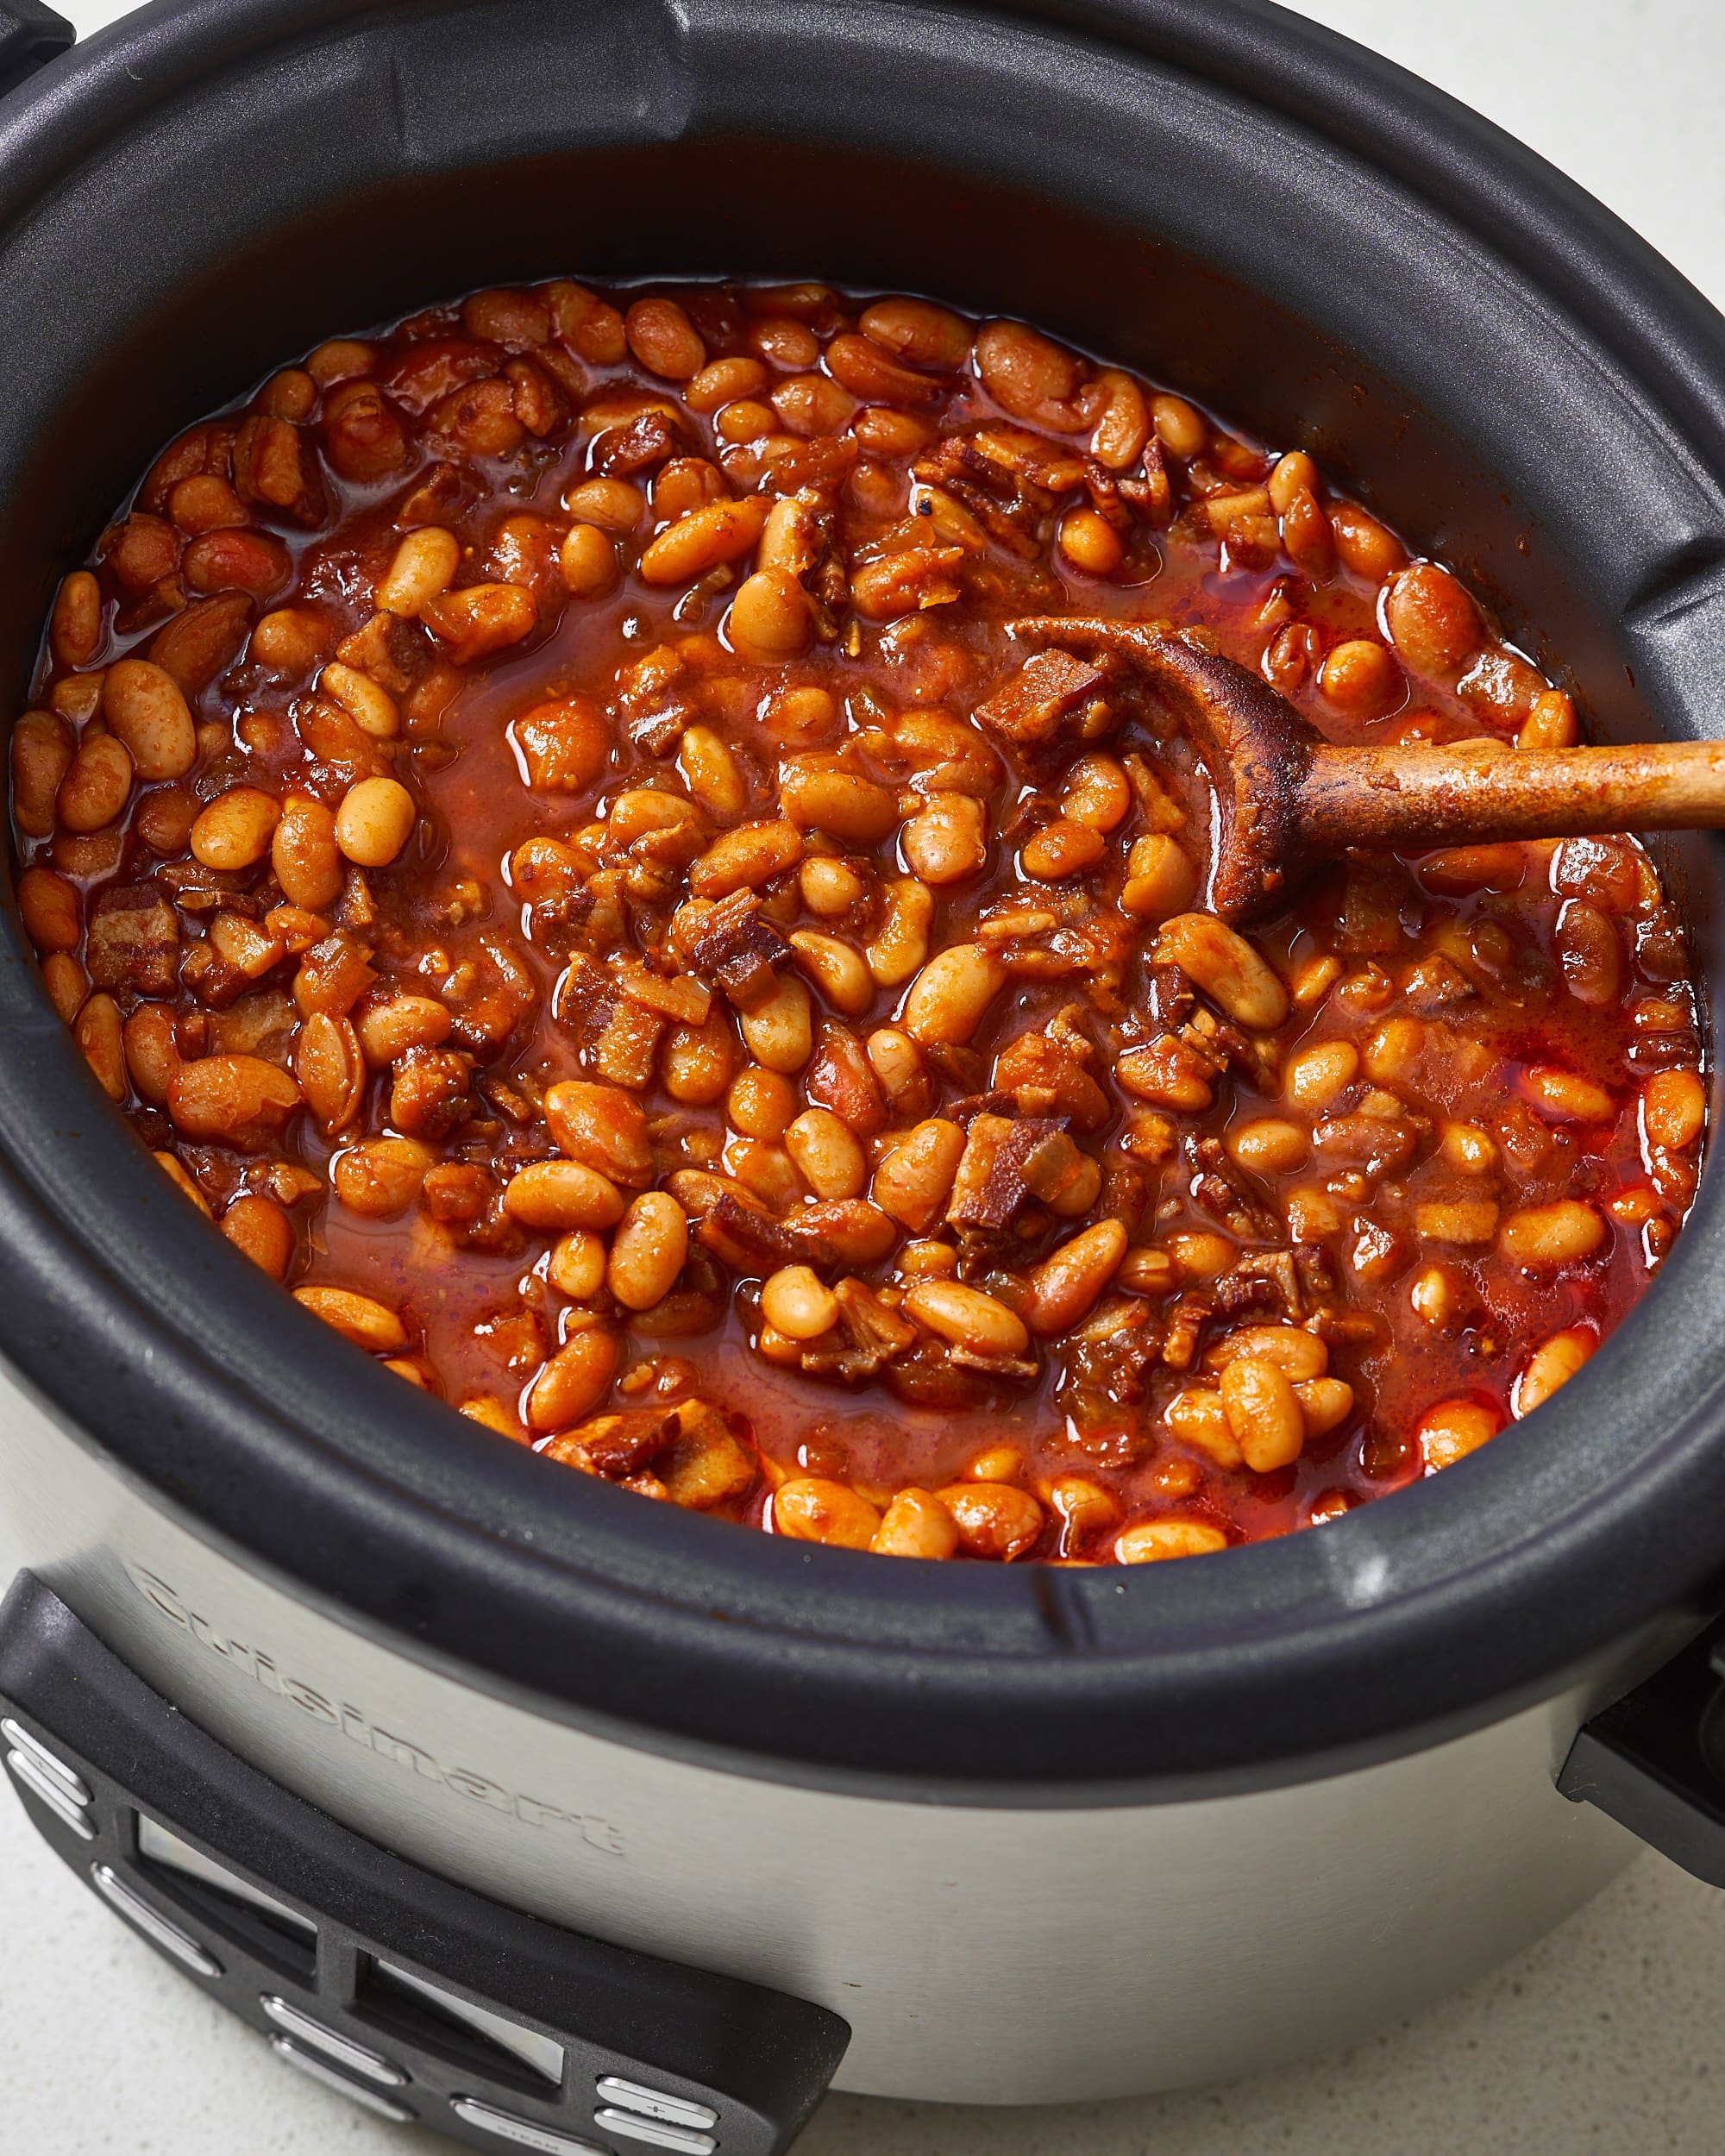 Brown Sugar & Bacon Slow Cooker Baked Beans